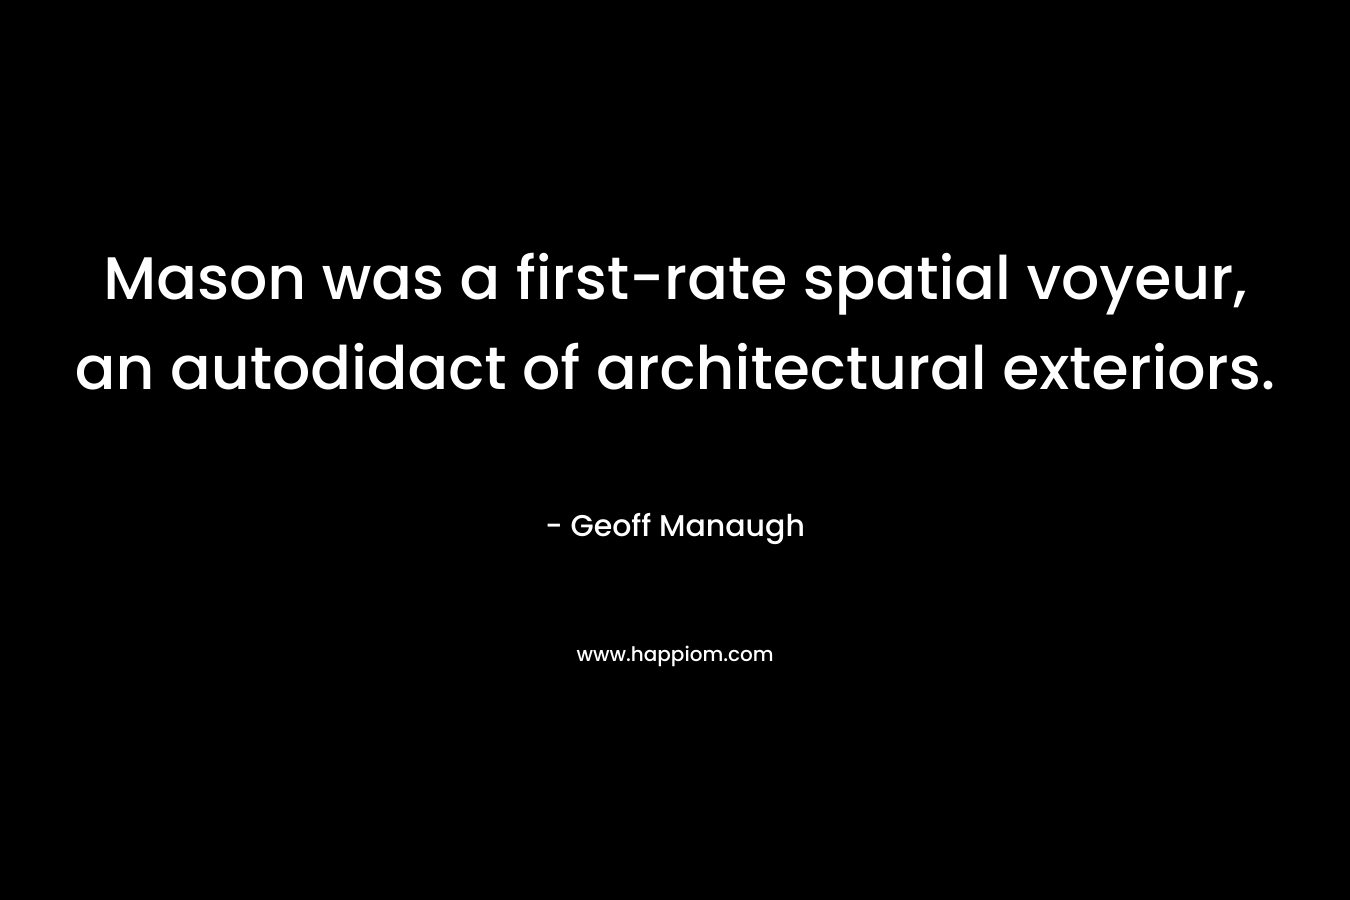 Mason was a first-rate spatial voyeur, an autodidact of architectural exteriors.